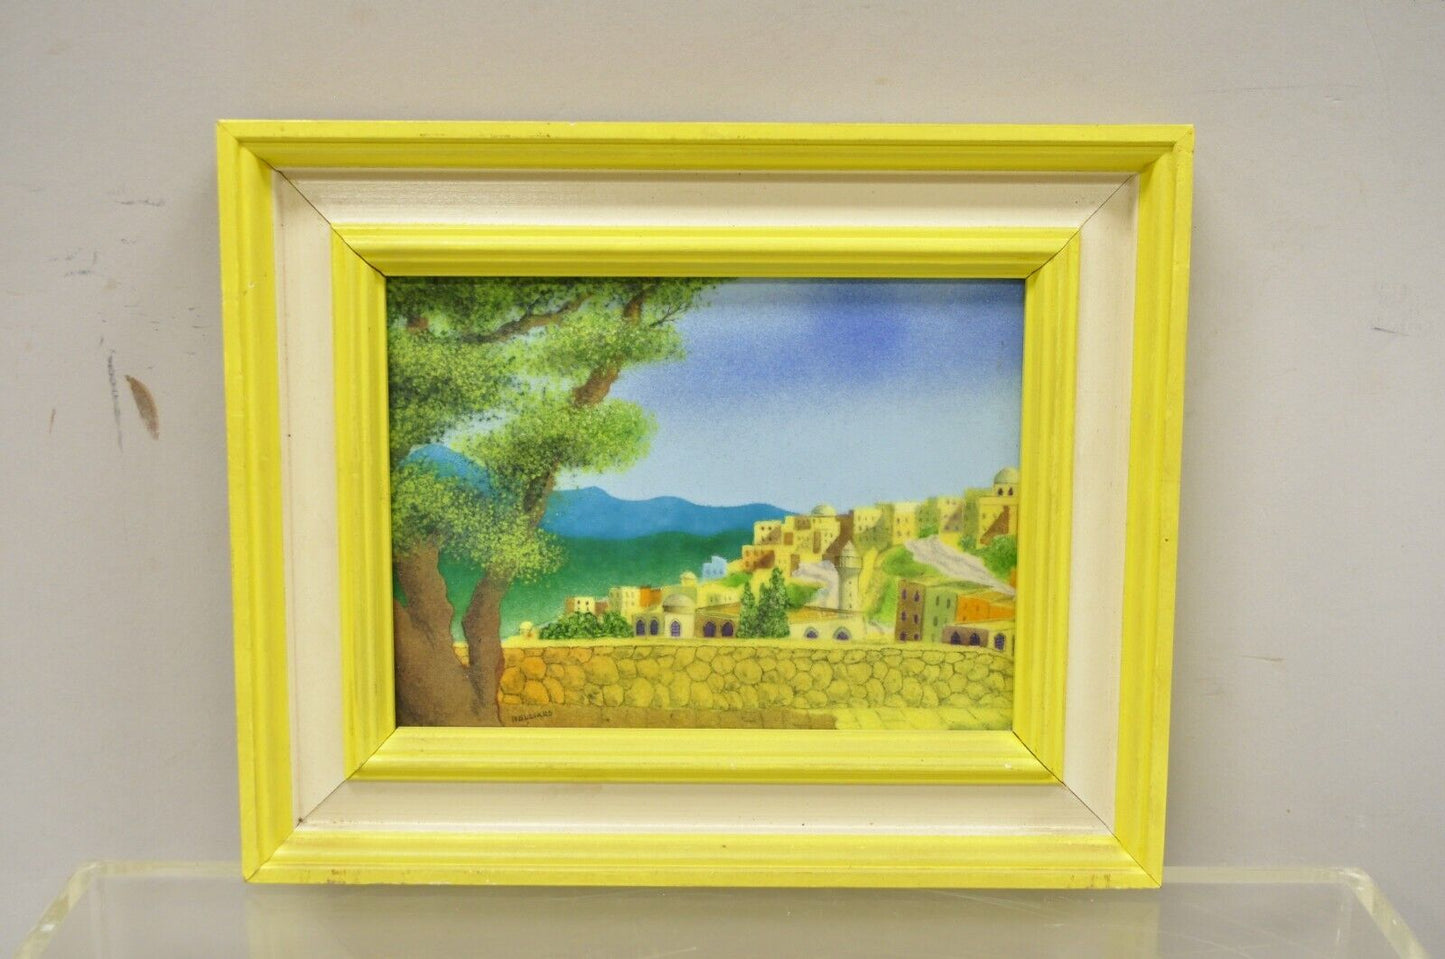 Daniel Belliard Enamel on Copper Small Framed Painting Yellow Countryside